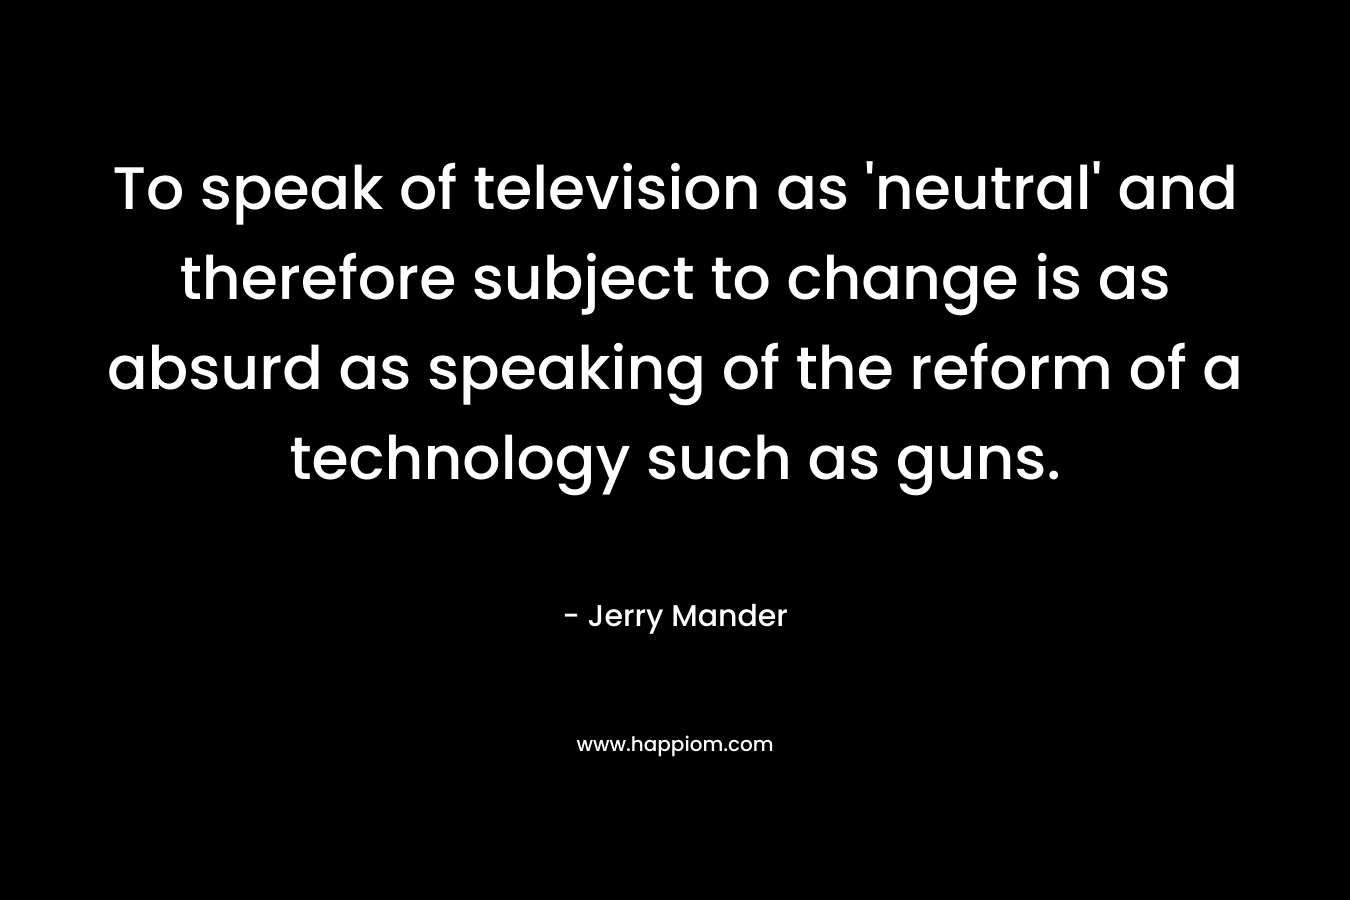 To speak of television as 'neutral' and therefore subject to change is as absurd as speaking of the reform of a technology such as guns.